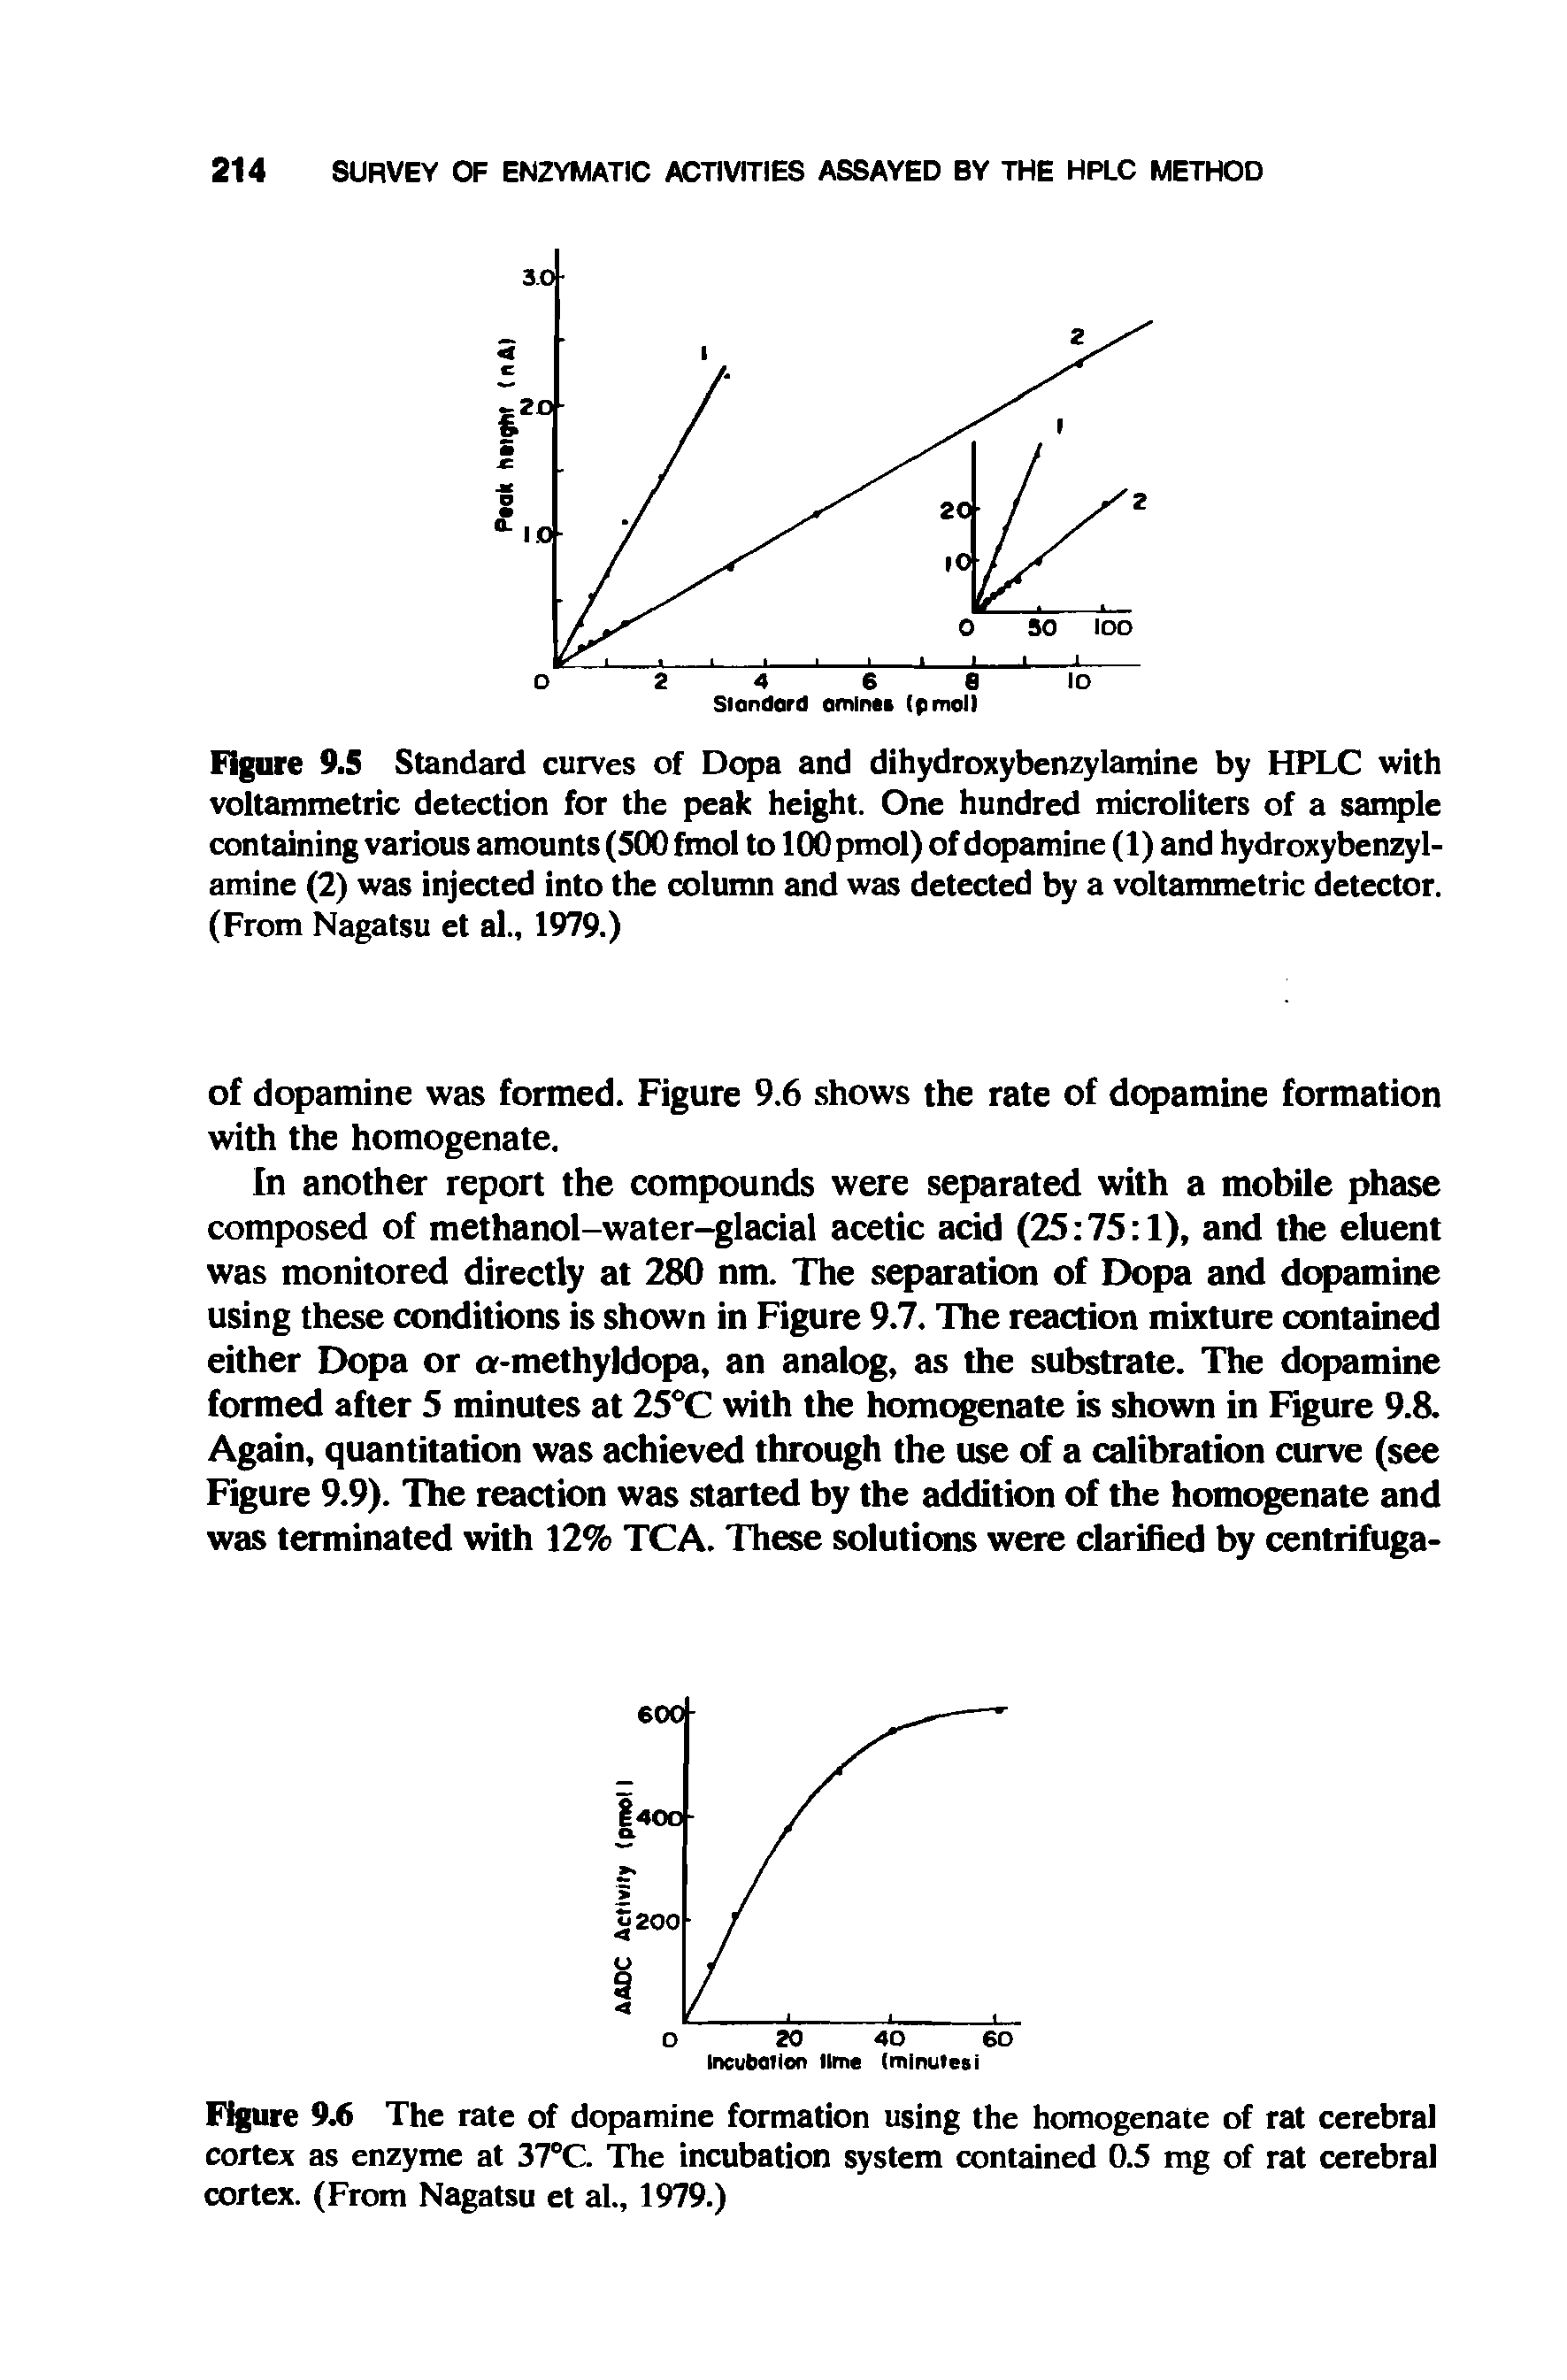 Figure 9.6 The rate of dopamine formation using the homogenate of rat cerebral cortex as enzyme at 37°C. The incubation system contained 0.5 mg of rat cerebral cortex. (From Nagatsu et al., 1979.)...